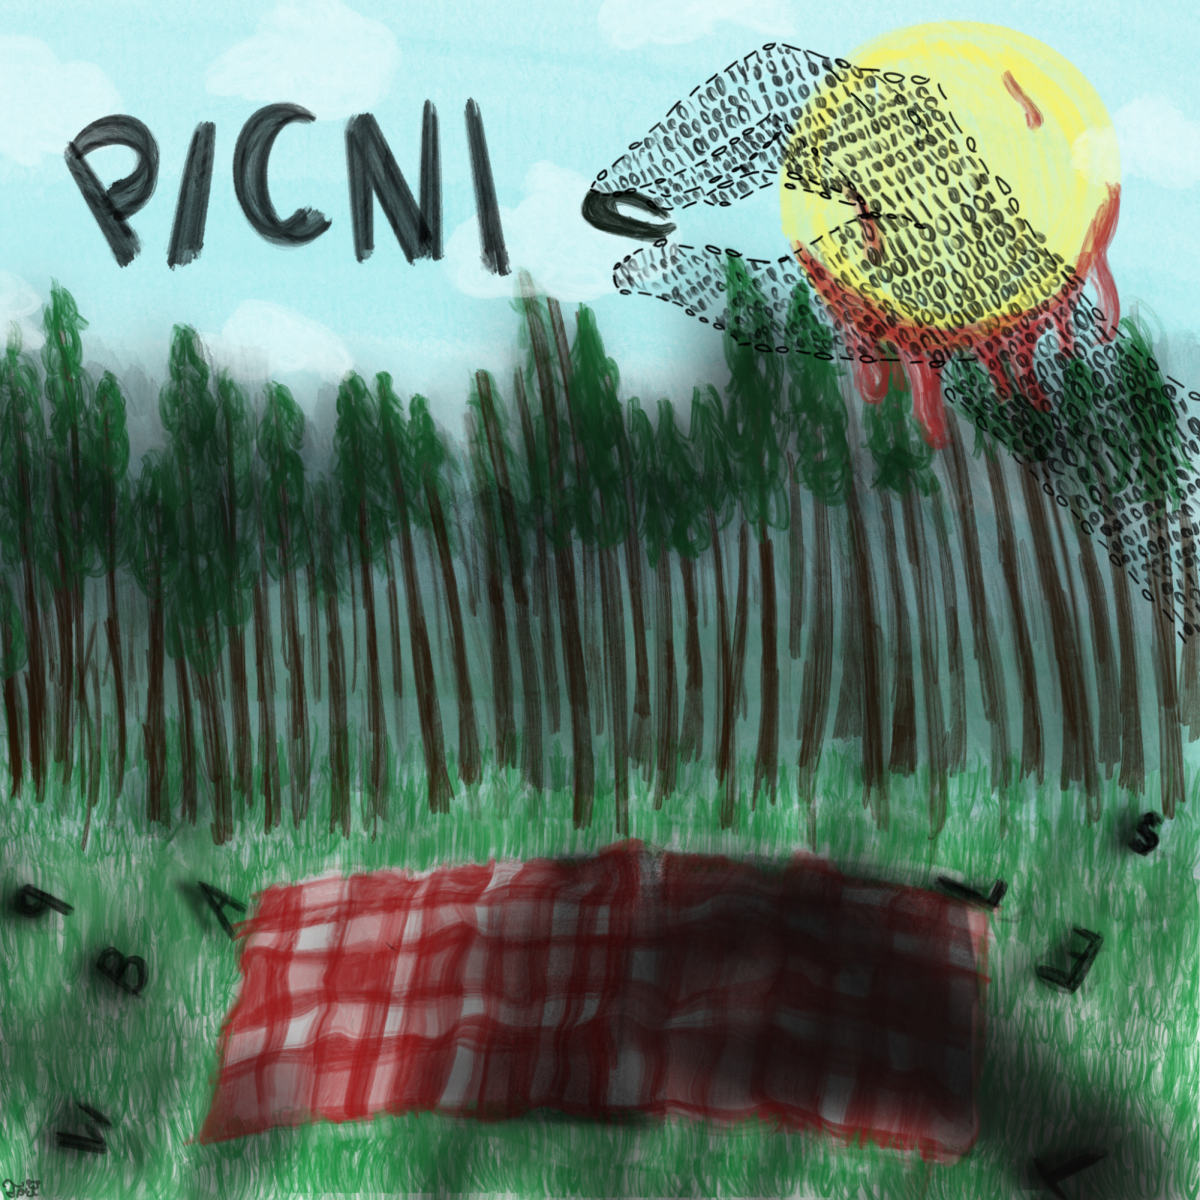 A hand composed of binary code reaches to finish the word picnic. The hand represents how dictating and controlling AI has been, taking over creative aspects of many careers. 